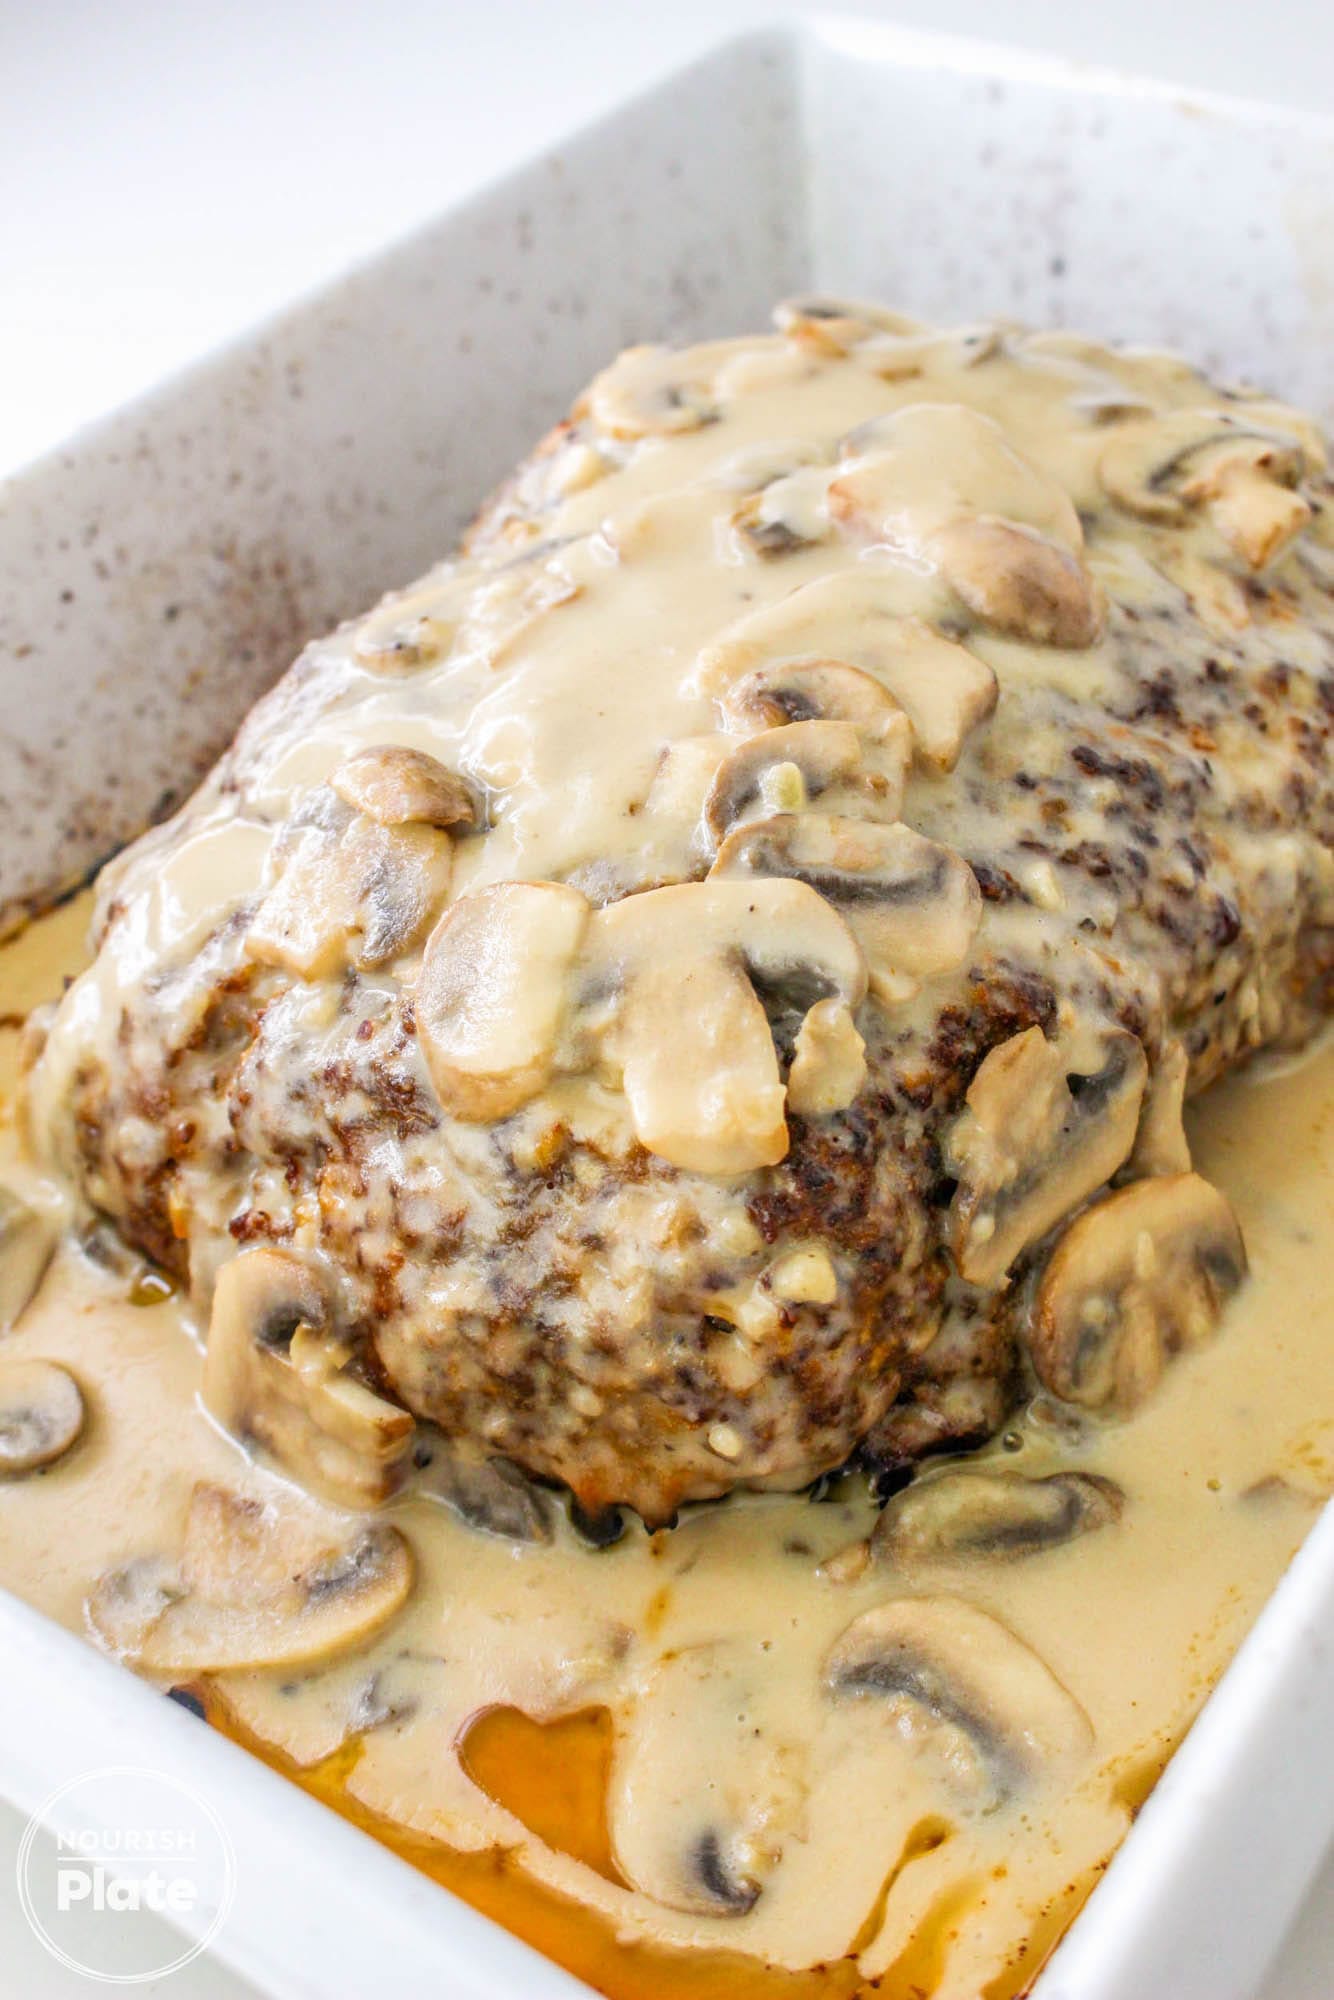 Mushroom meatloaf with gravy in a white baking dish